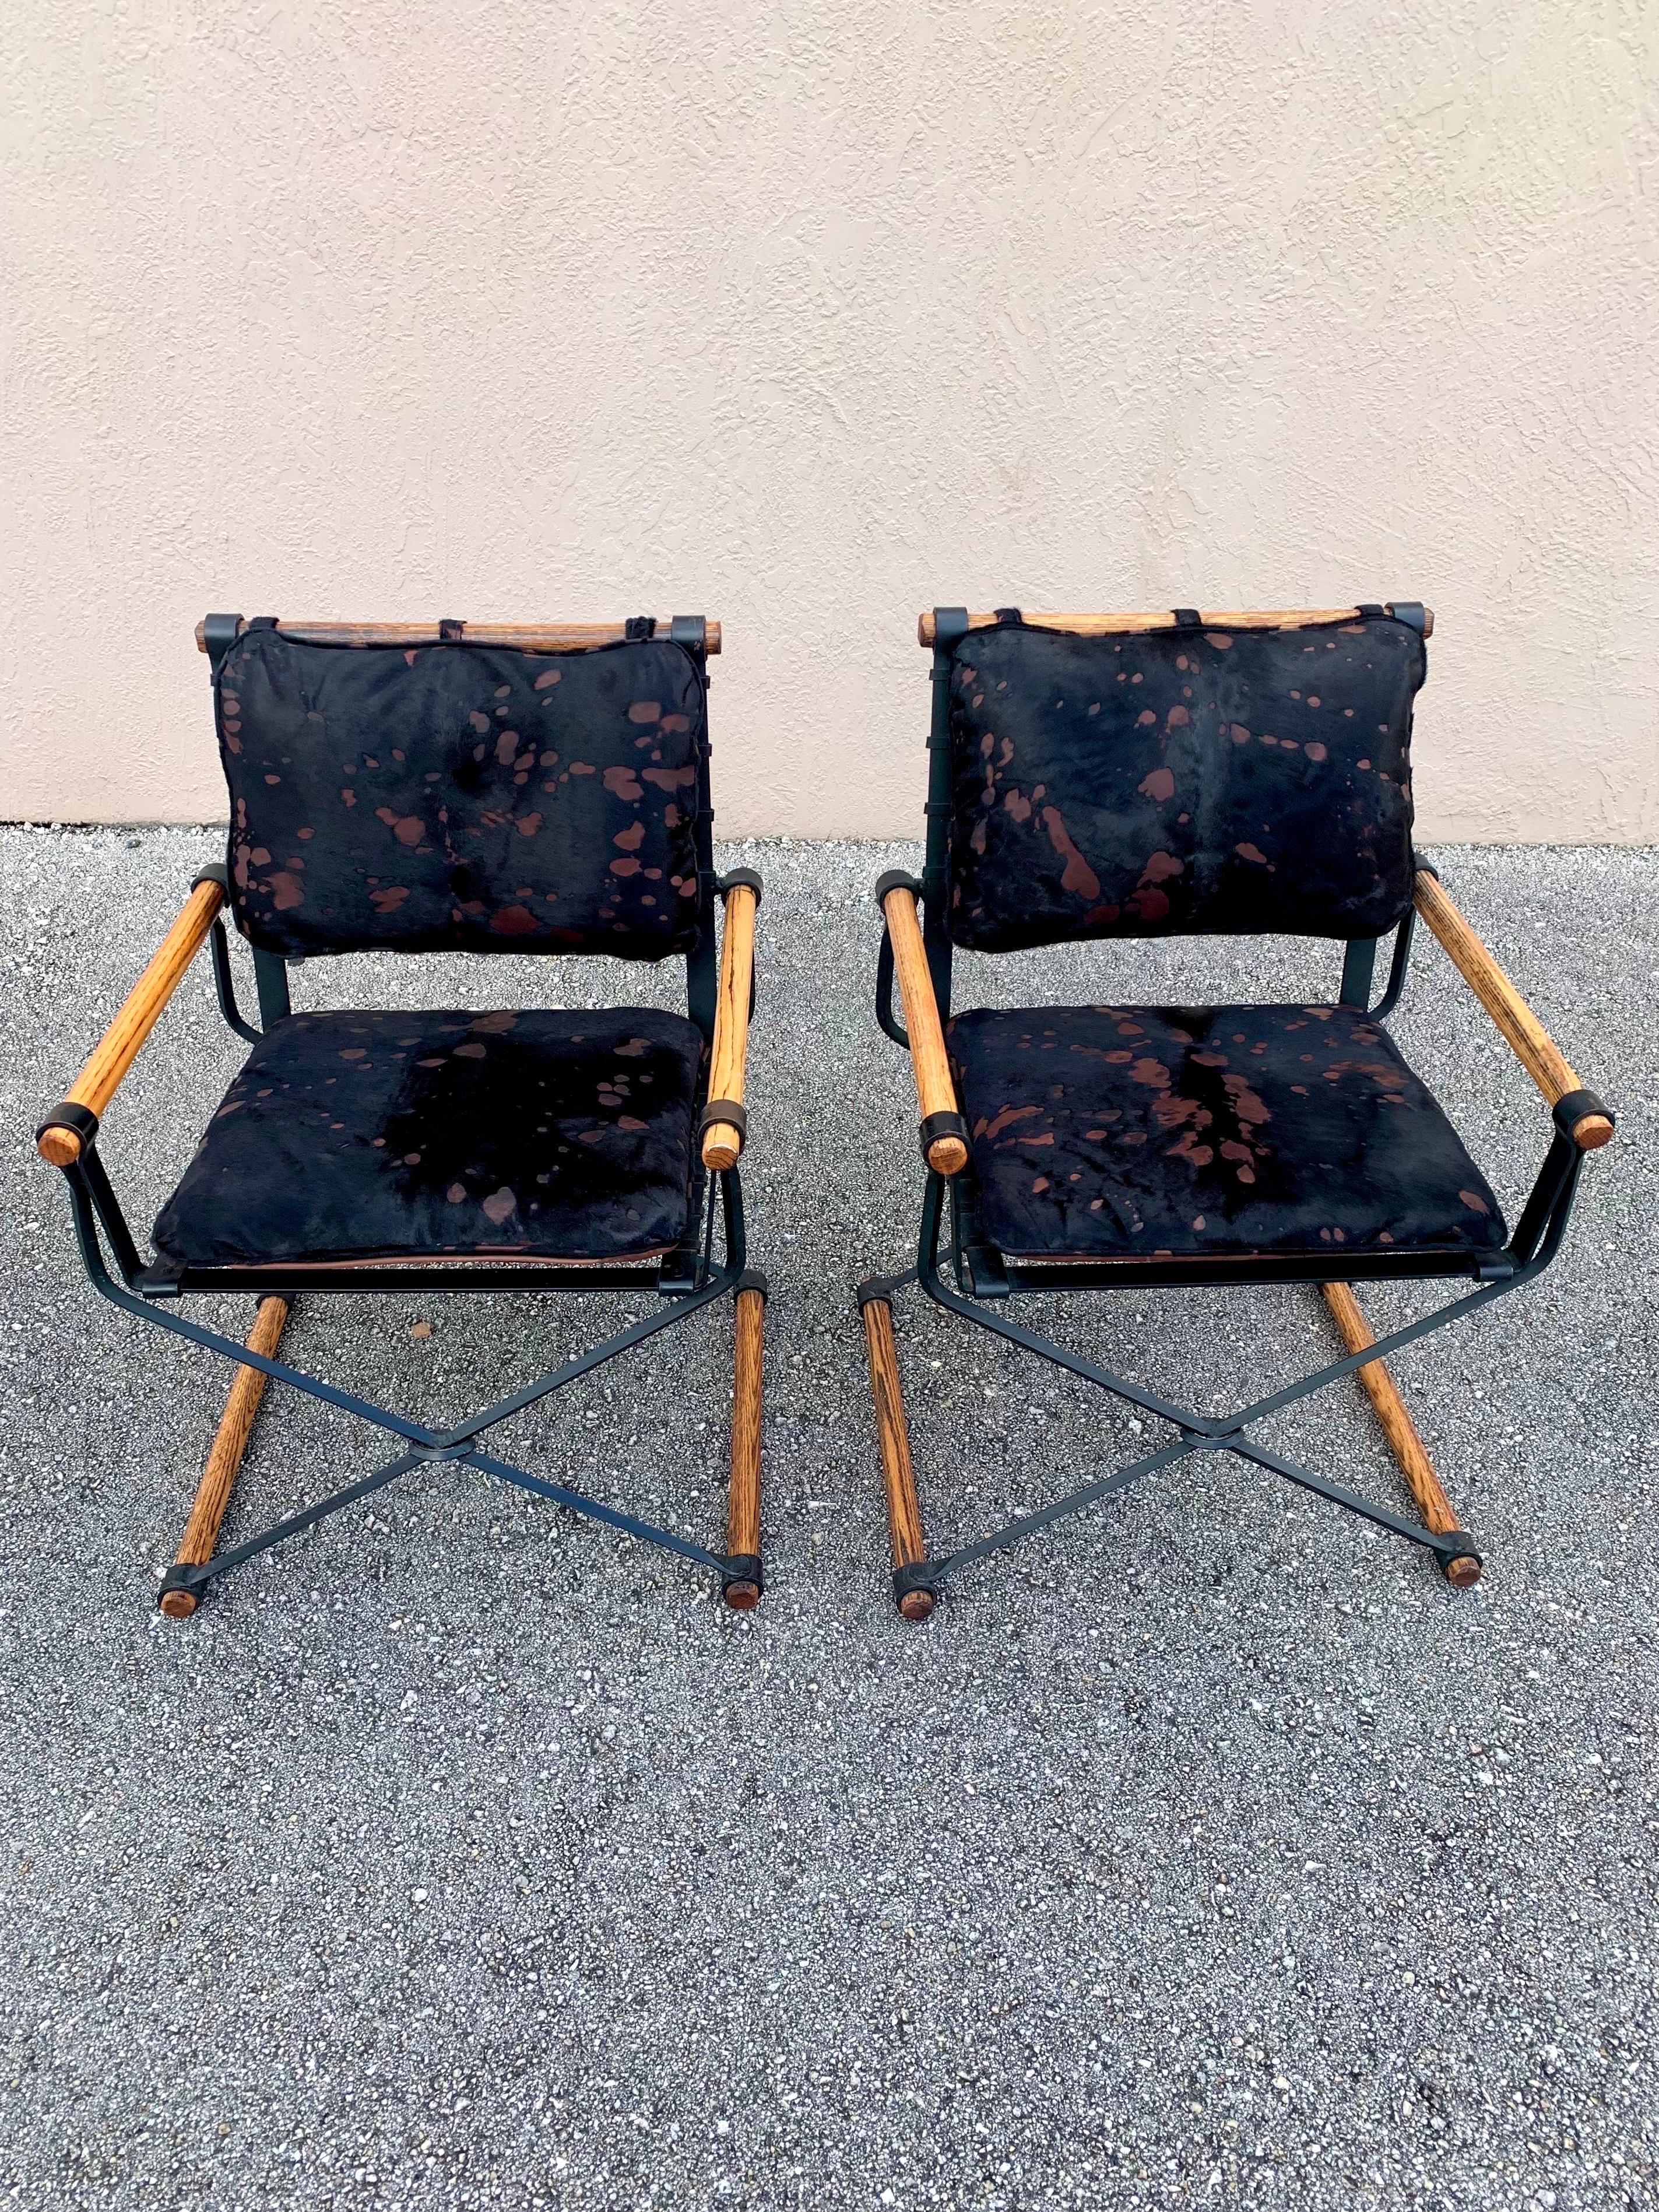 A pair of wrought iron and oak X frame chairs with cushions in the casual tradition by Californian Cleo Baldon for Terra Furniture, American, Circa 1970. 

Freshly upholstered in a beautiful black and brown hide on leather that beautifully